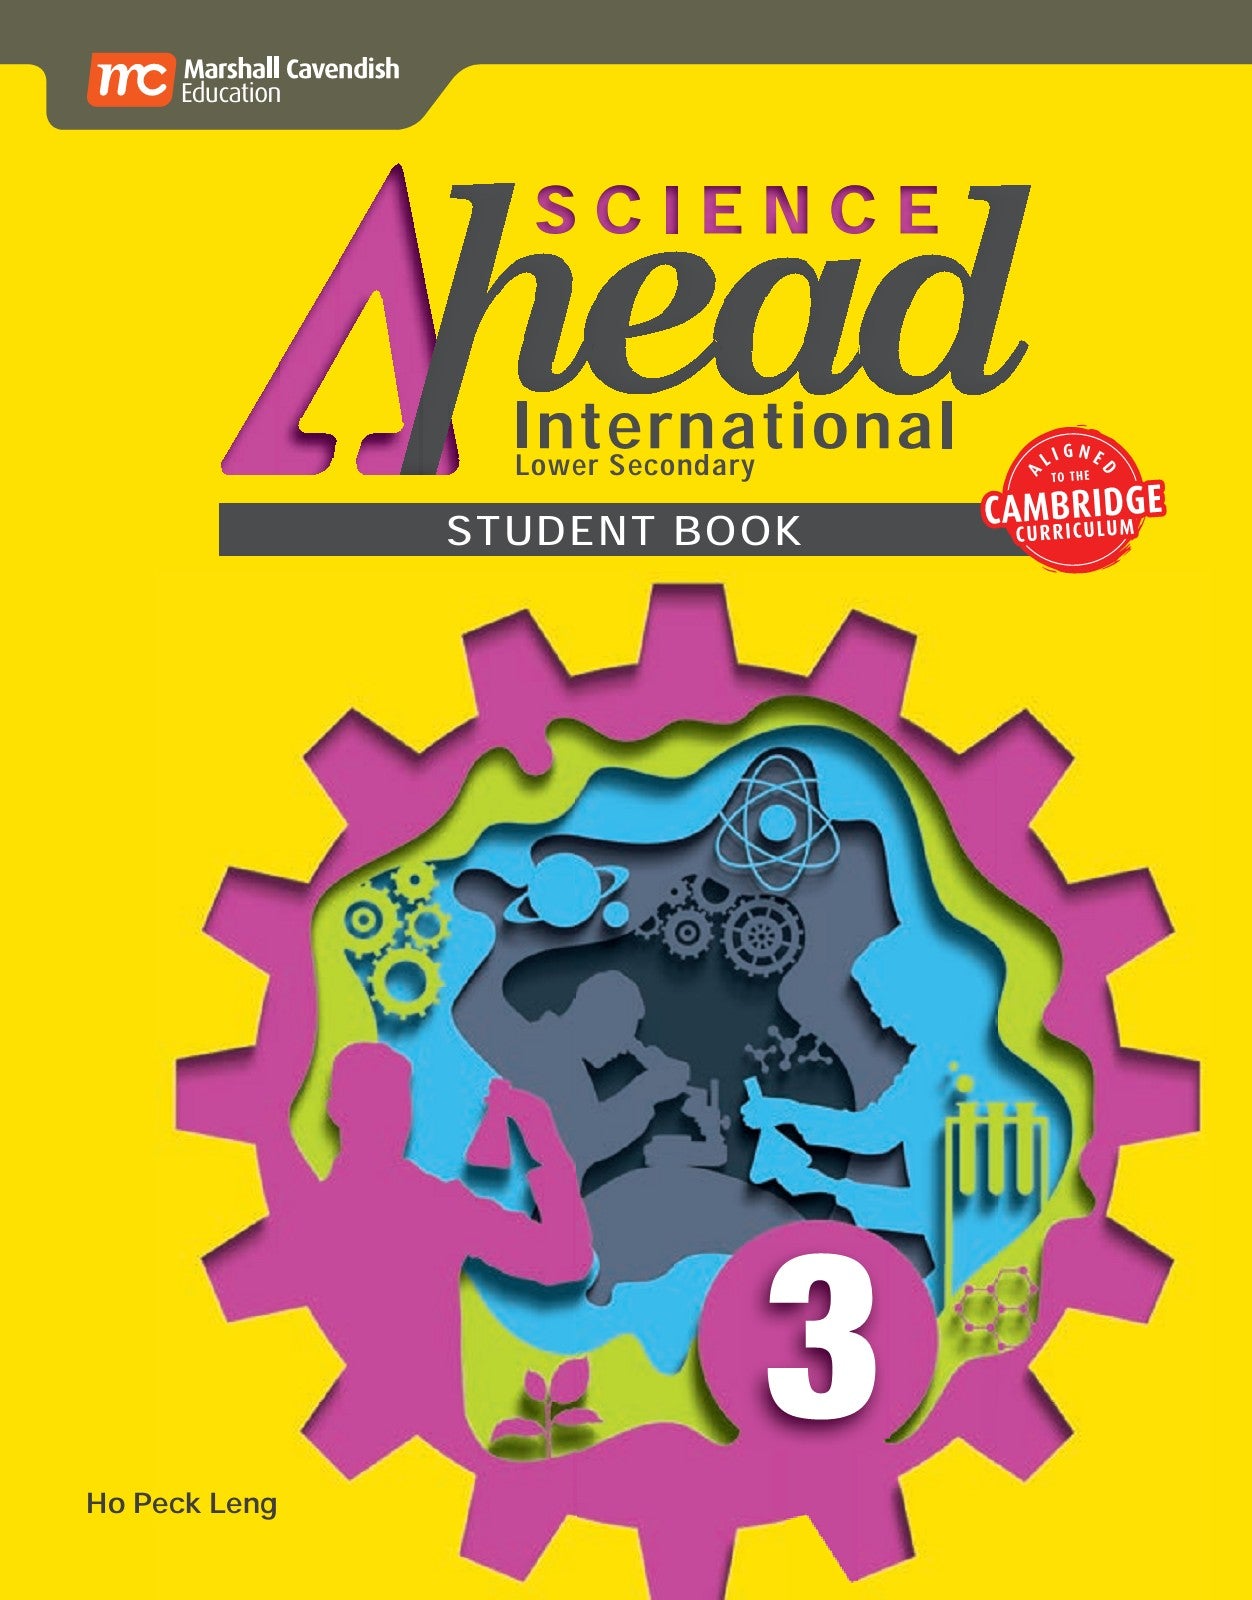 Science Ahead – International Lower Secondary (Student Book 3) Aligned to the Cambridge Curriculum